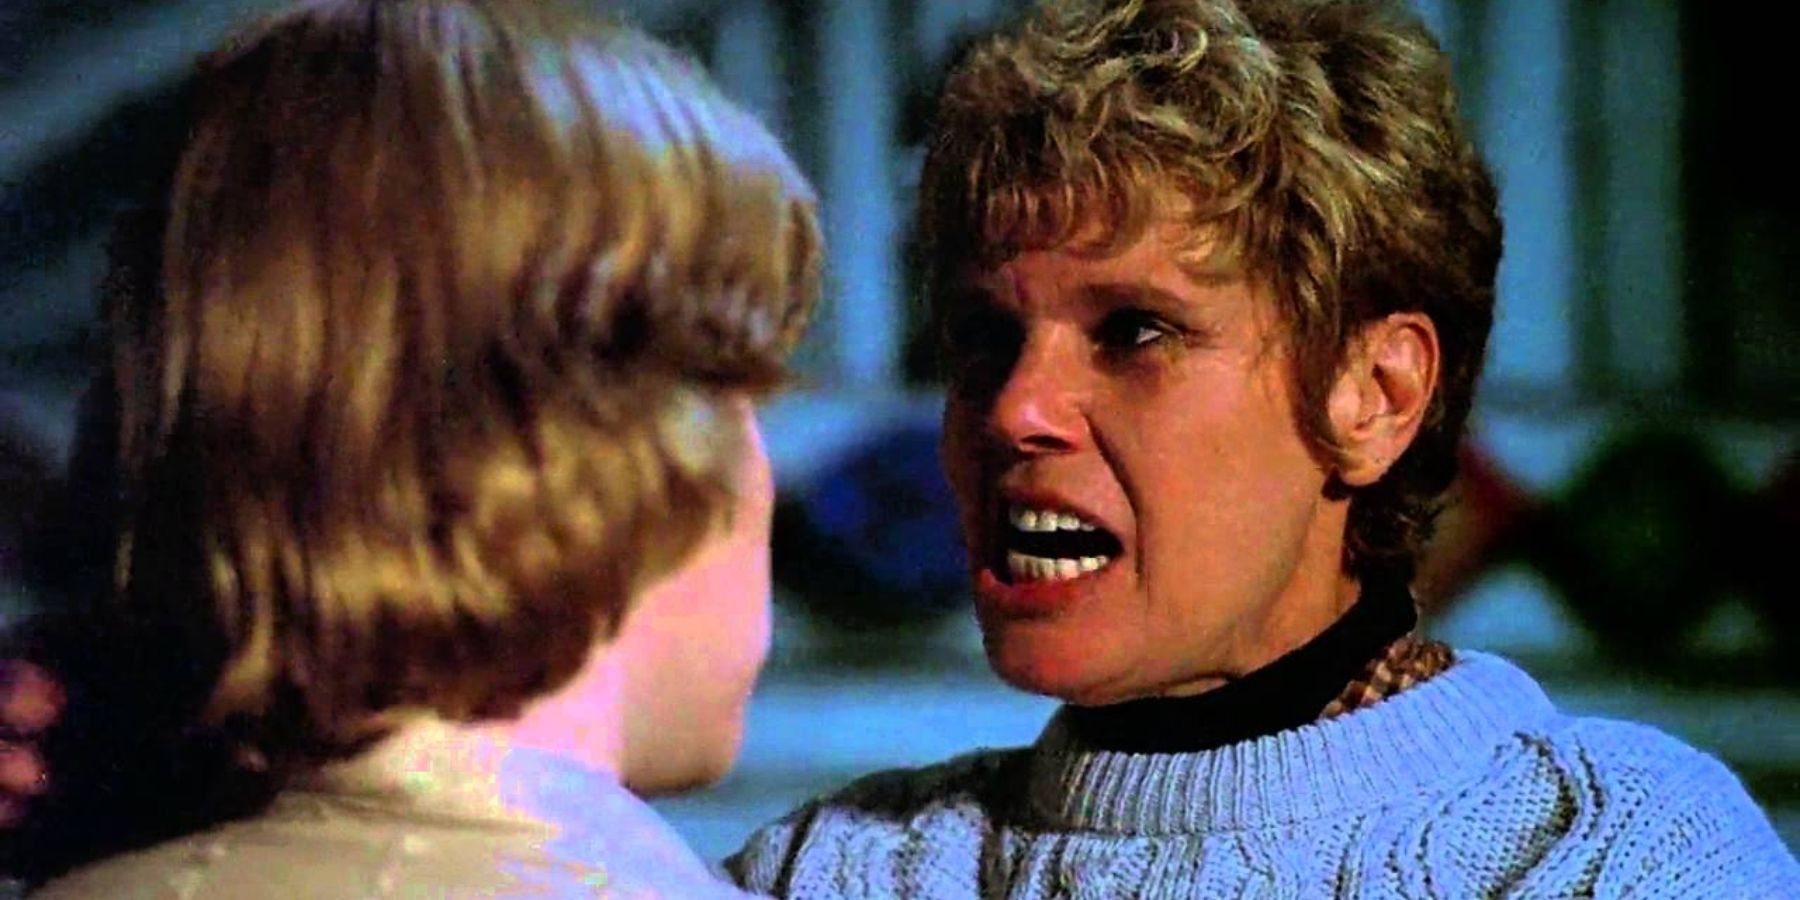 Pamela Voorhees (Betsy Palmer) in Friday The 13th